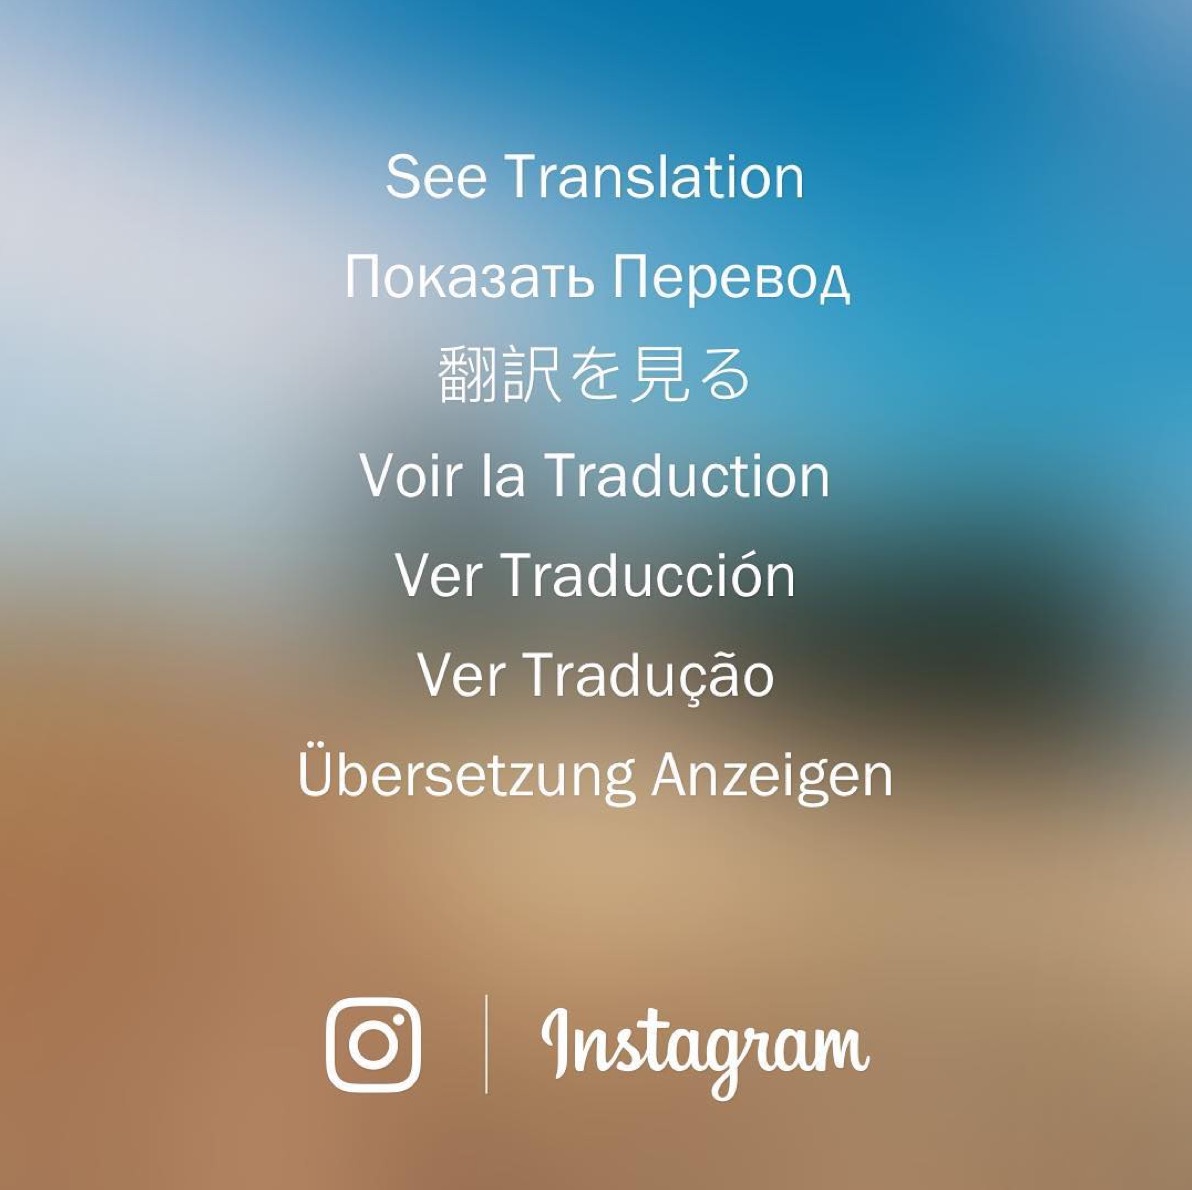 Instagram is Adding a Translation Button